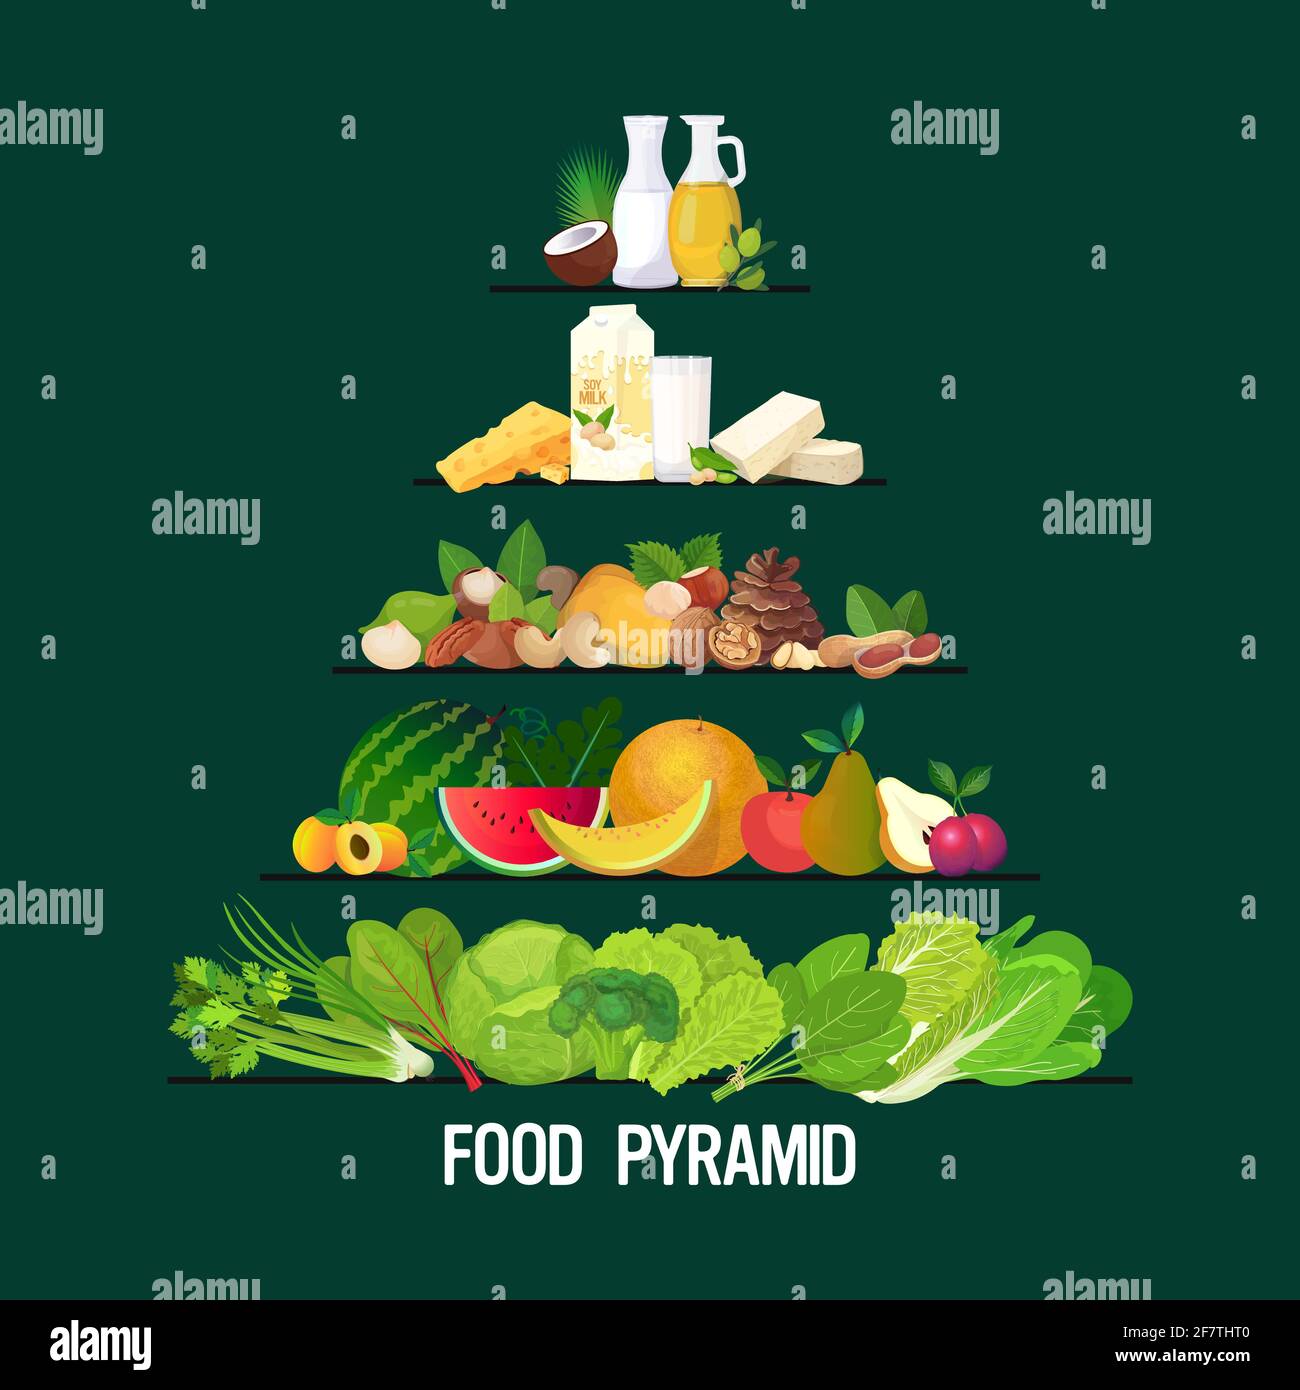 Food groups wheel hi-res stock photography and images - Alamy